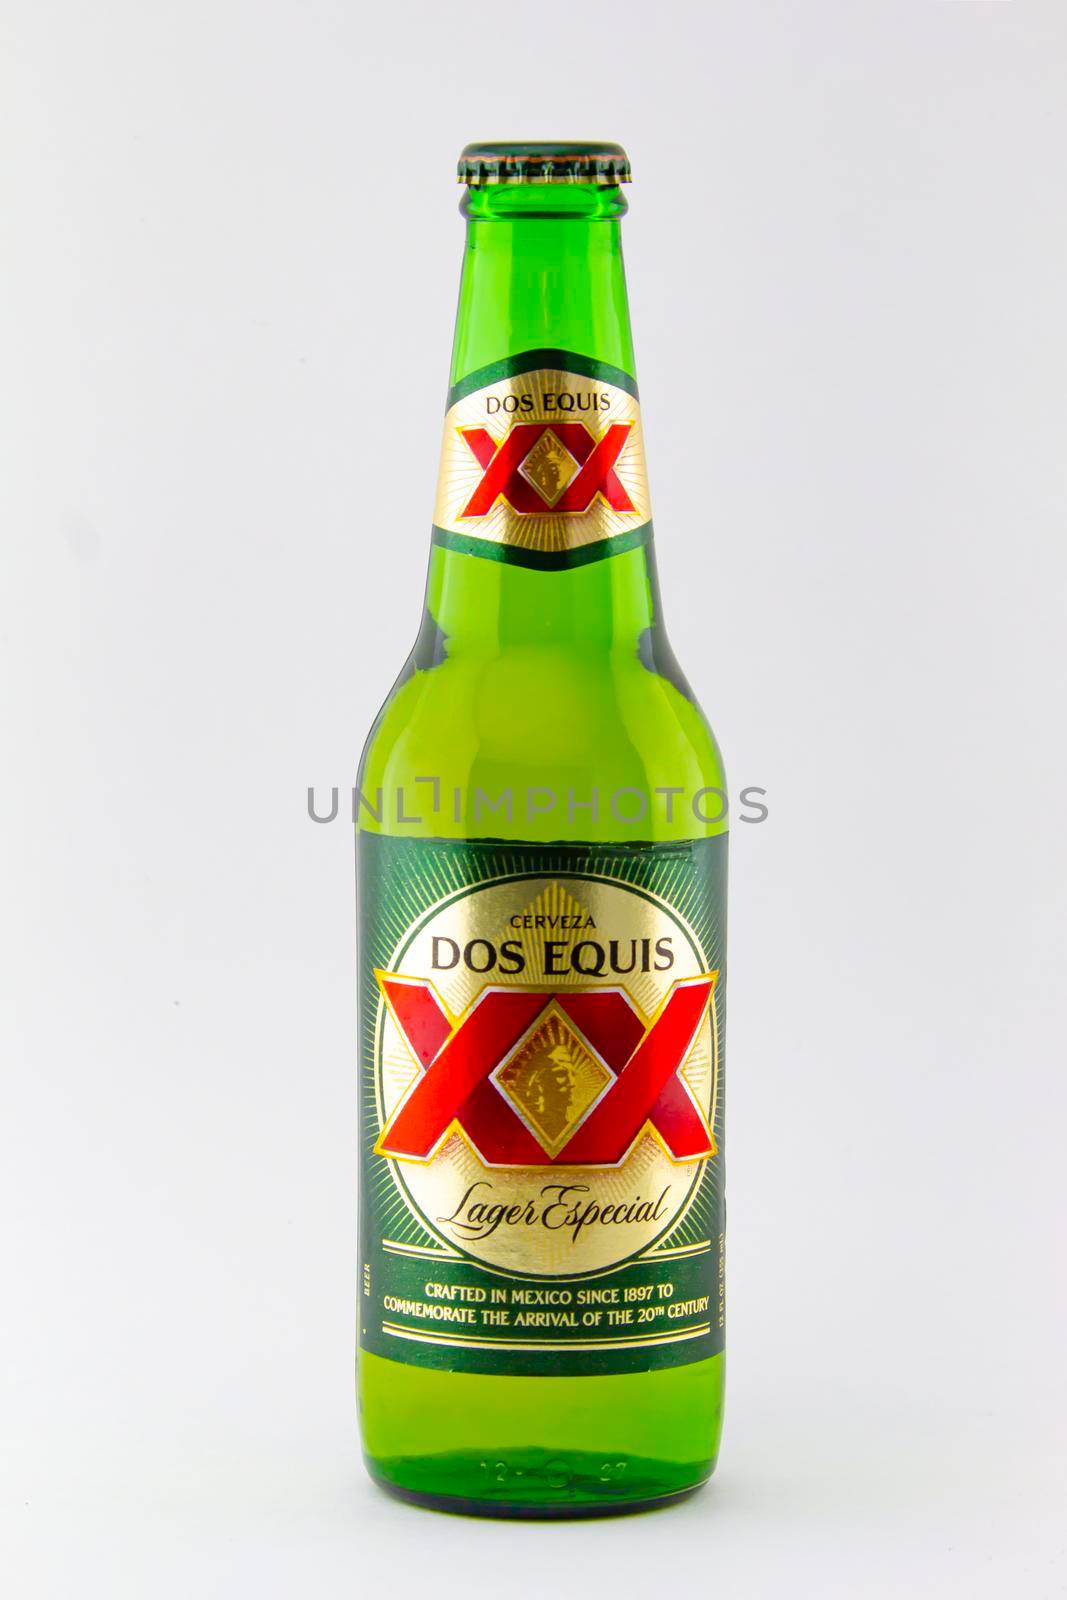 Calgary Alberta, Canada. Feb 15, 2021. A bottle of Dos Equis Lager beer on a white background